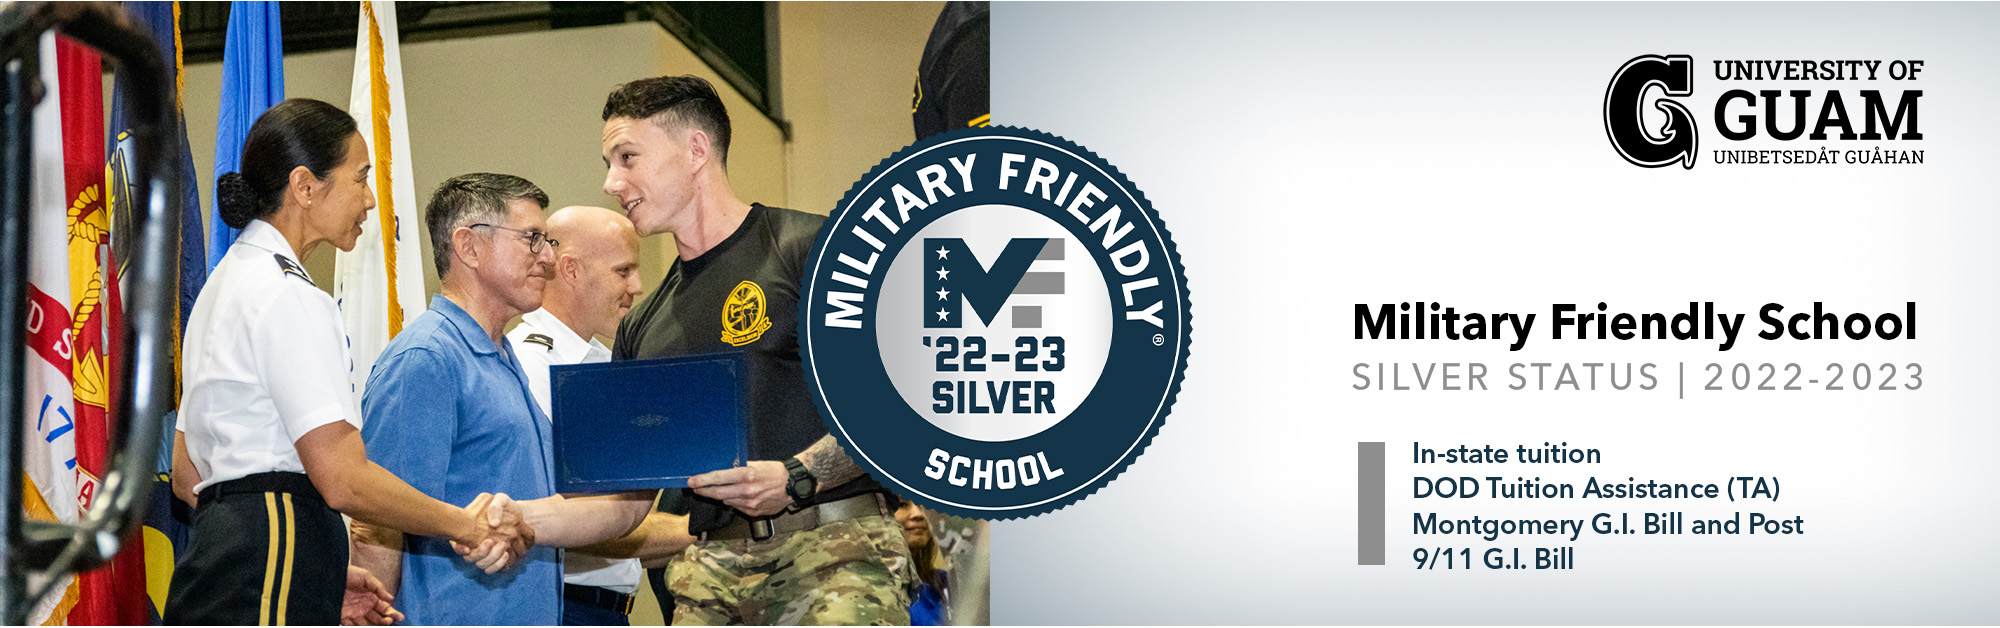 Silver Status 2022-2023. In-state tuition, DOD Tuition Assistance, Montgomery G.I. Bill and Post 9/11 G.I. Bill